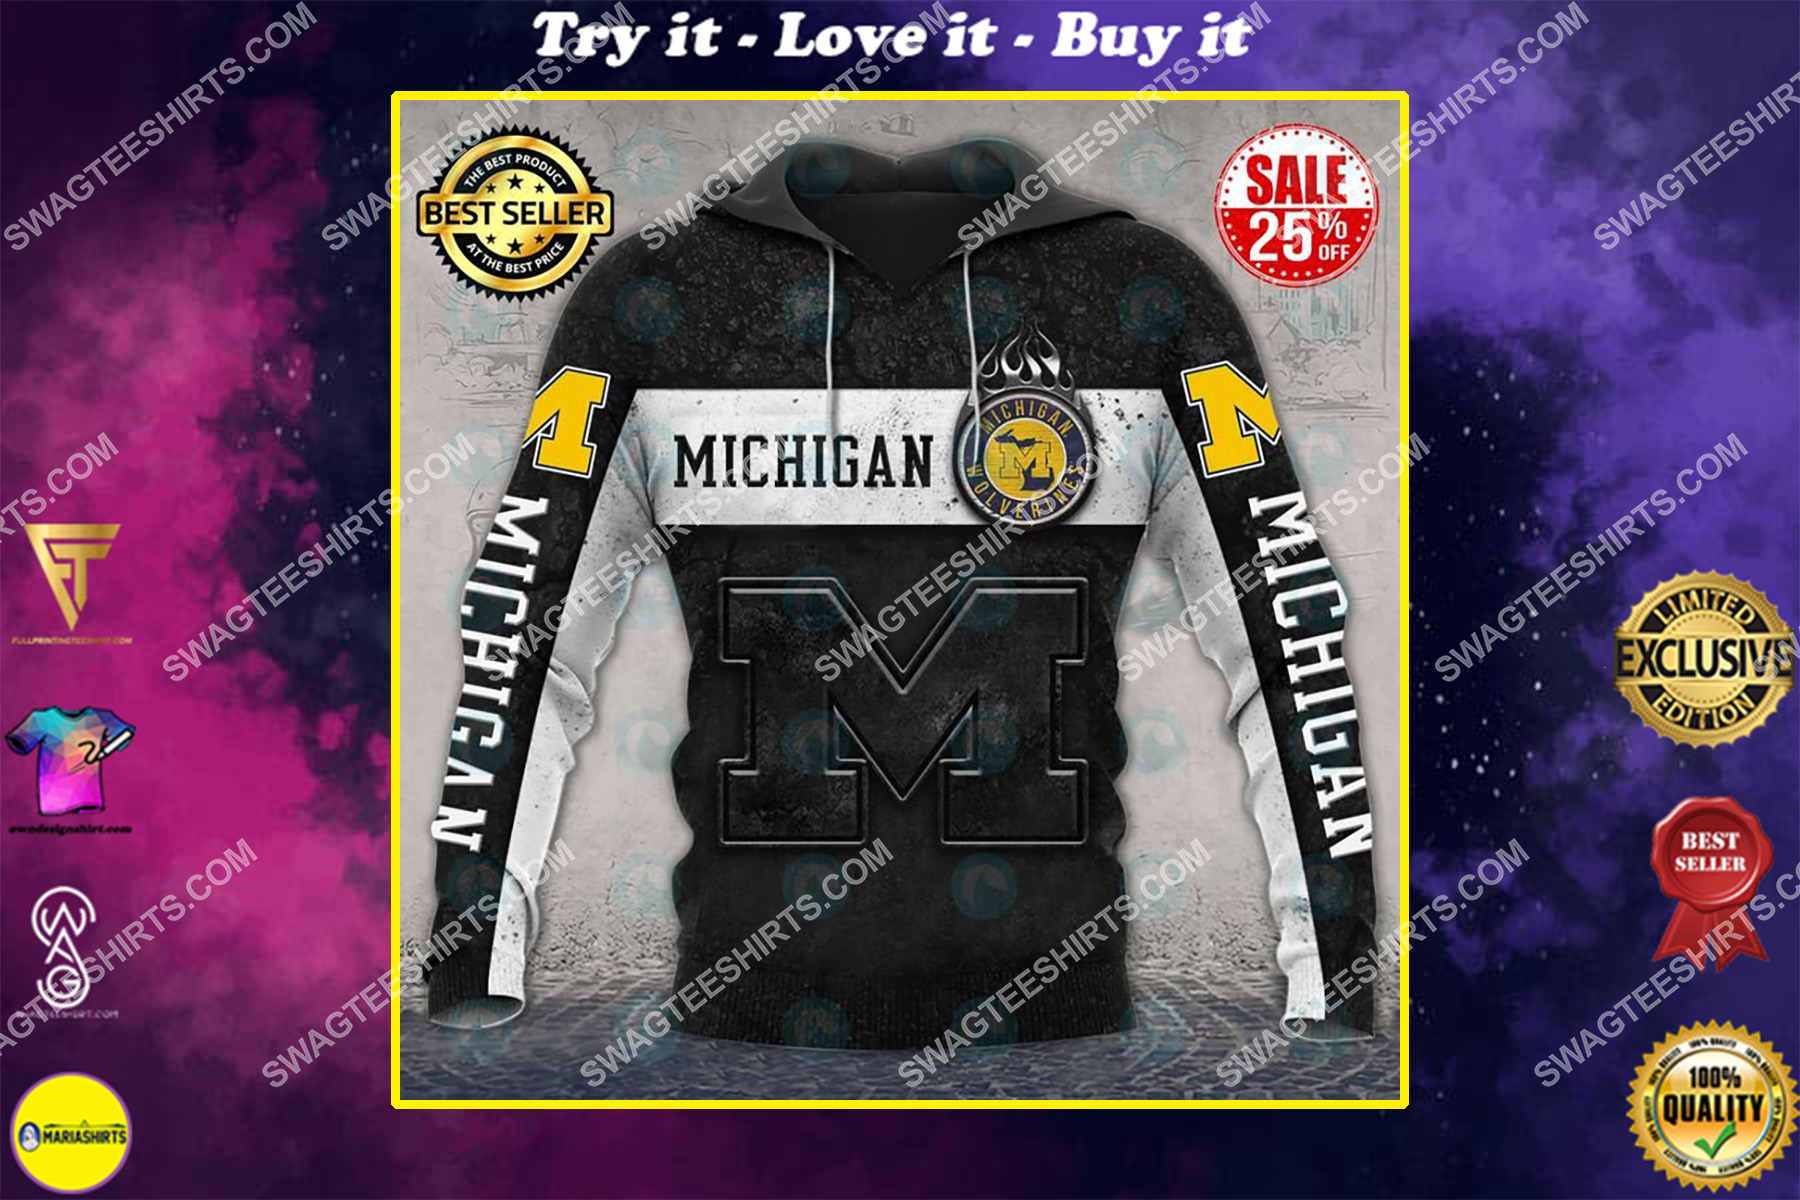 the michigan wolverines football team all over printed shirt